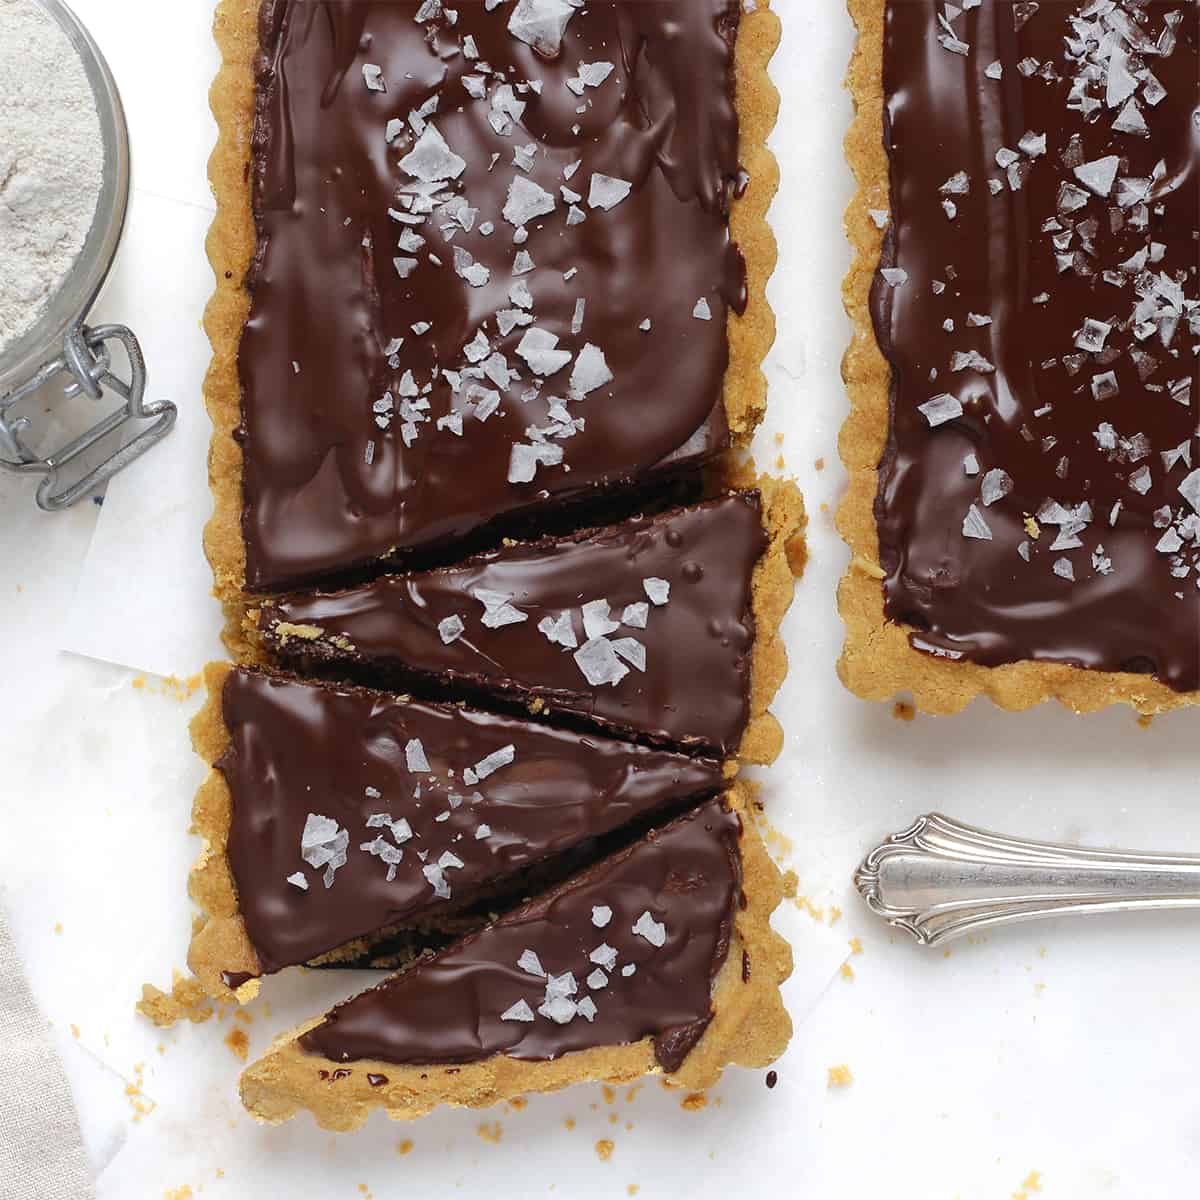 baked salted chocolate tart sliced with knife.